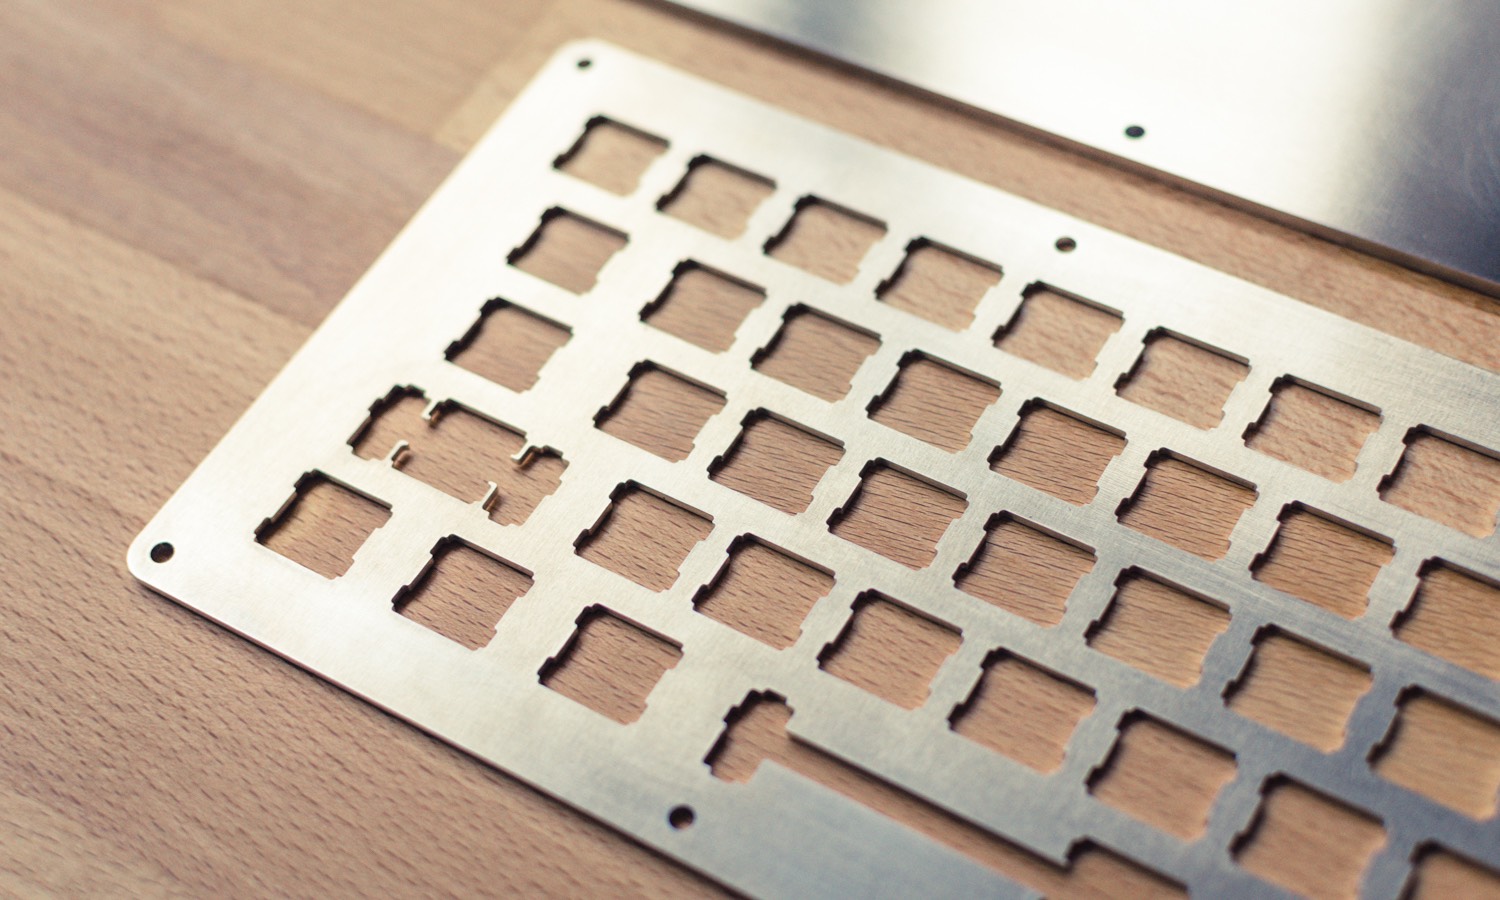 Polished Aluminium cover and bottom plates for 68Keys.io mechanical keyboard (Details, Close-Up)